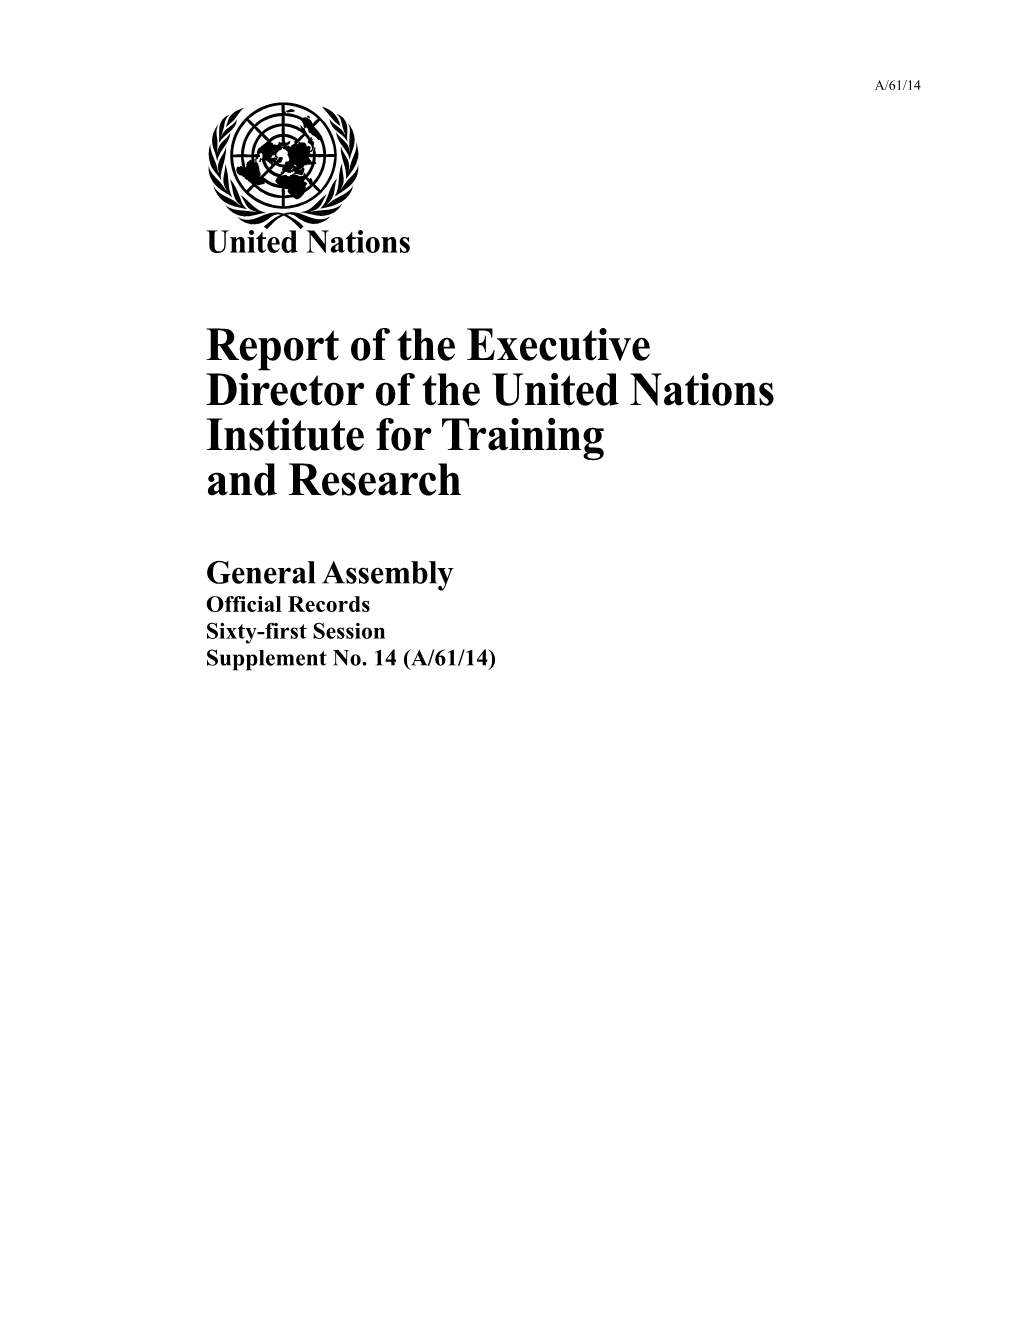 Report to the General Assembly for the Period from 01.01.2004 to 31.12.2005